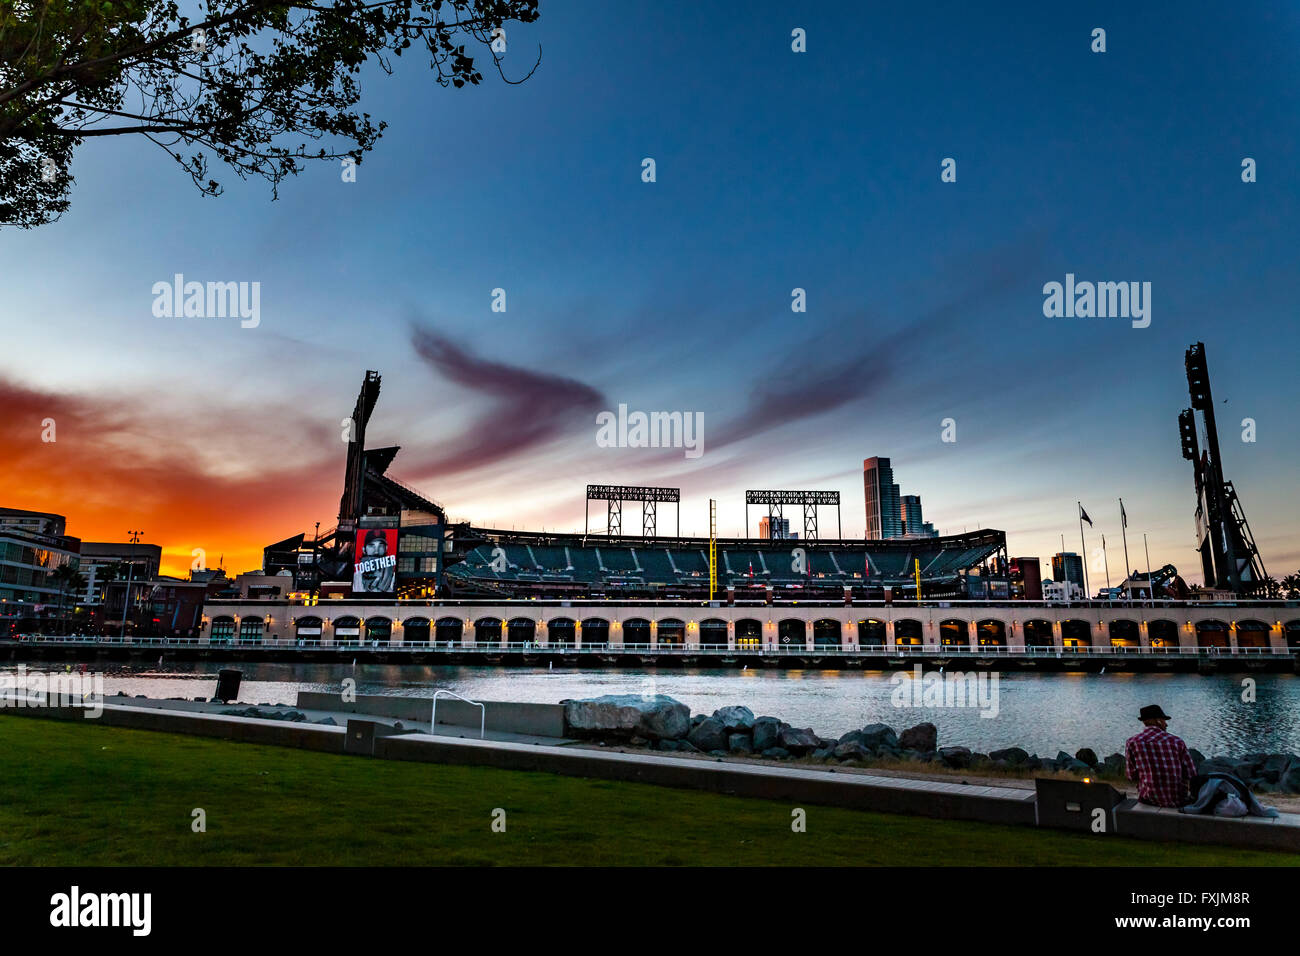 AT&T park in San Francisco California home of the Giants baseball team Stock Photo